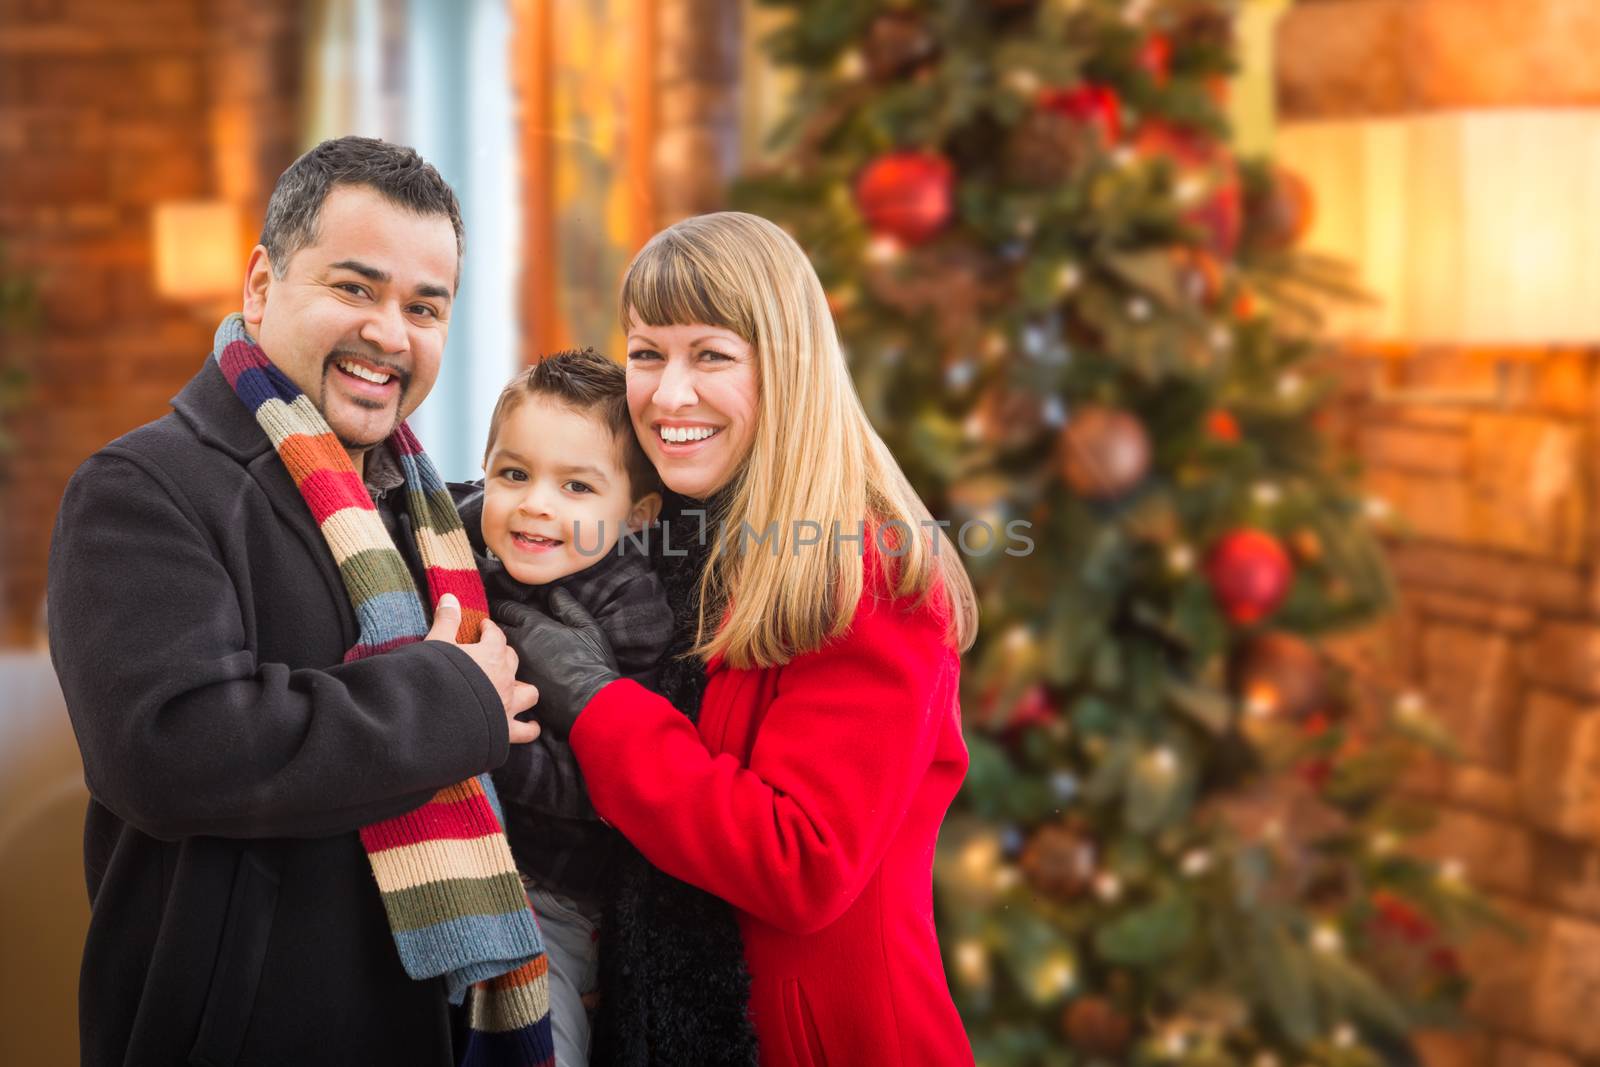 Young Mixed Race Family Portrait In Front of Christmas Tree Indoors. by Feverpitched